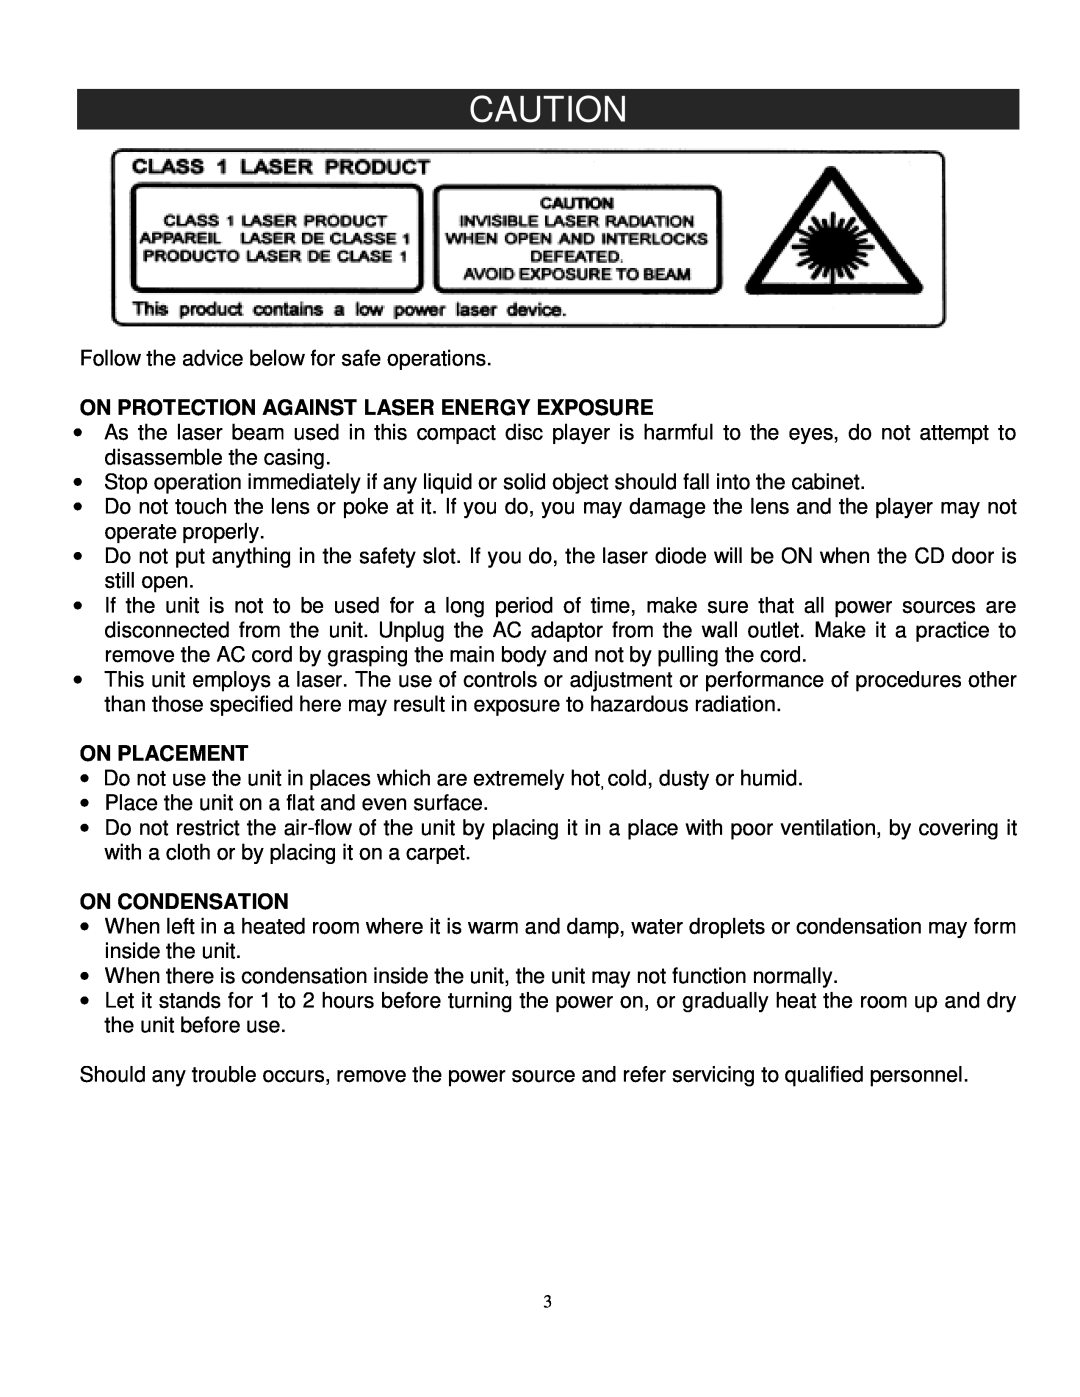 Jensen JMC-326 instruction manual On Protection Against Laser Energy Exposure, On Placement, On Condensation 